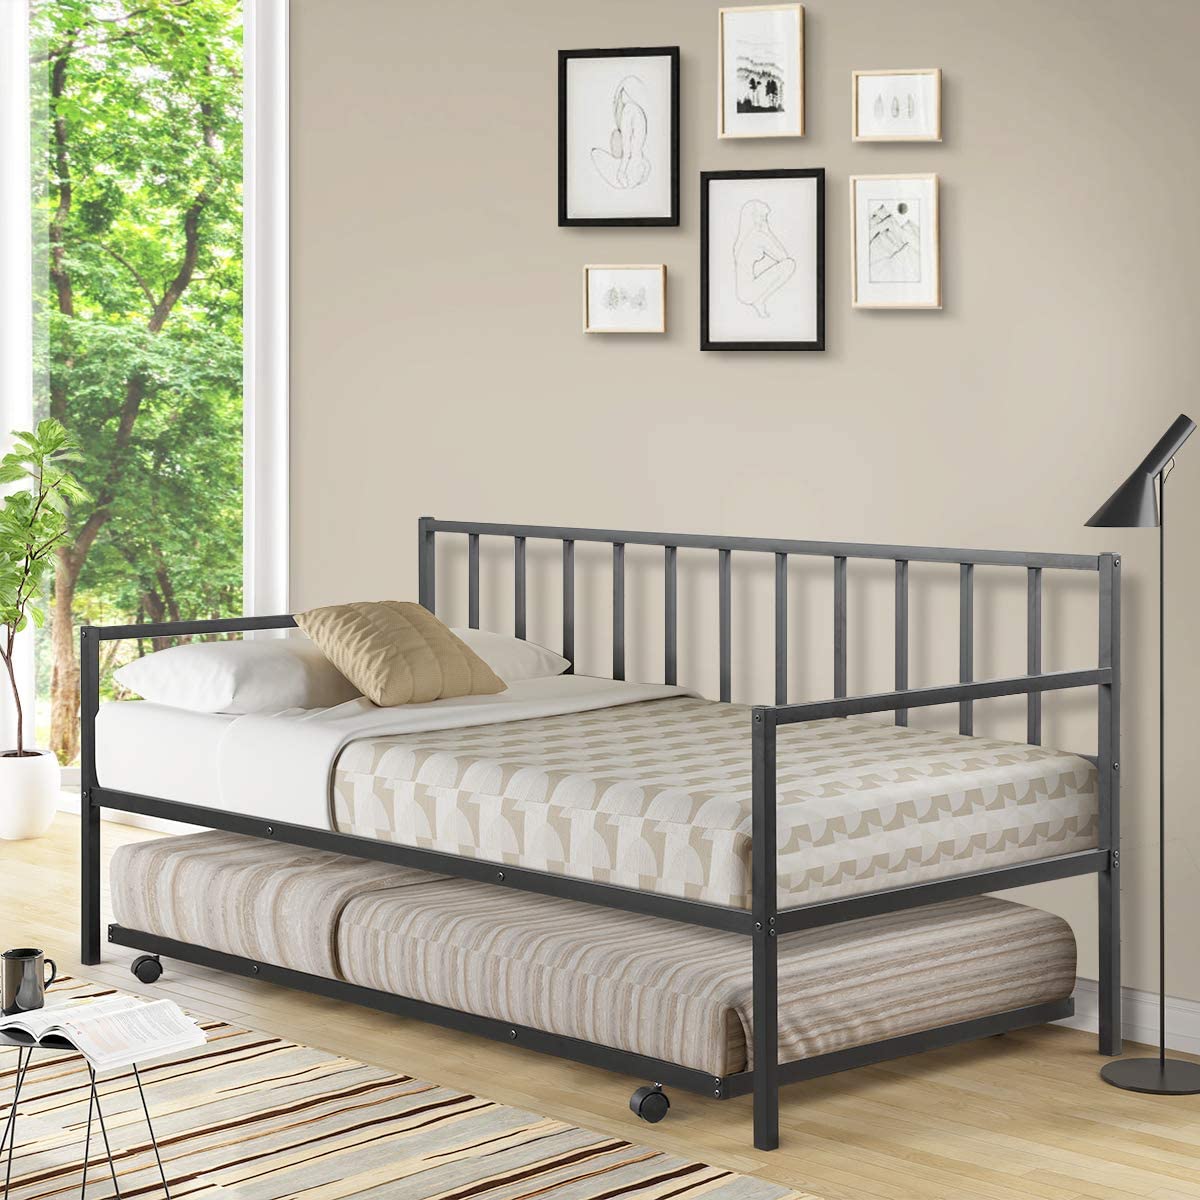 5. Giantex Twin Size Daybed and Trundle